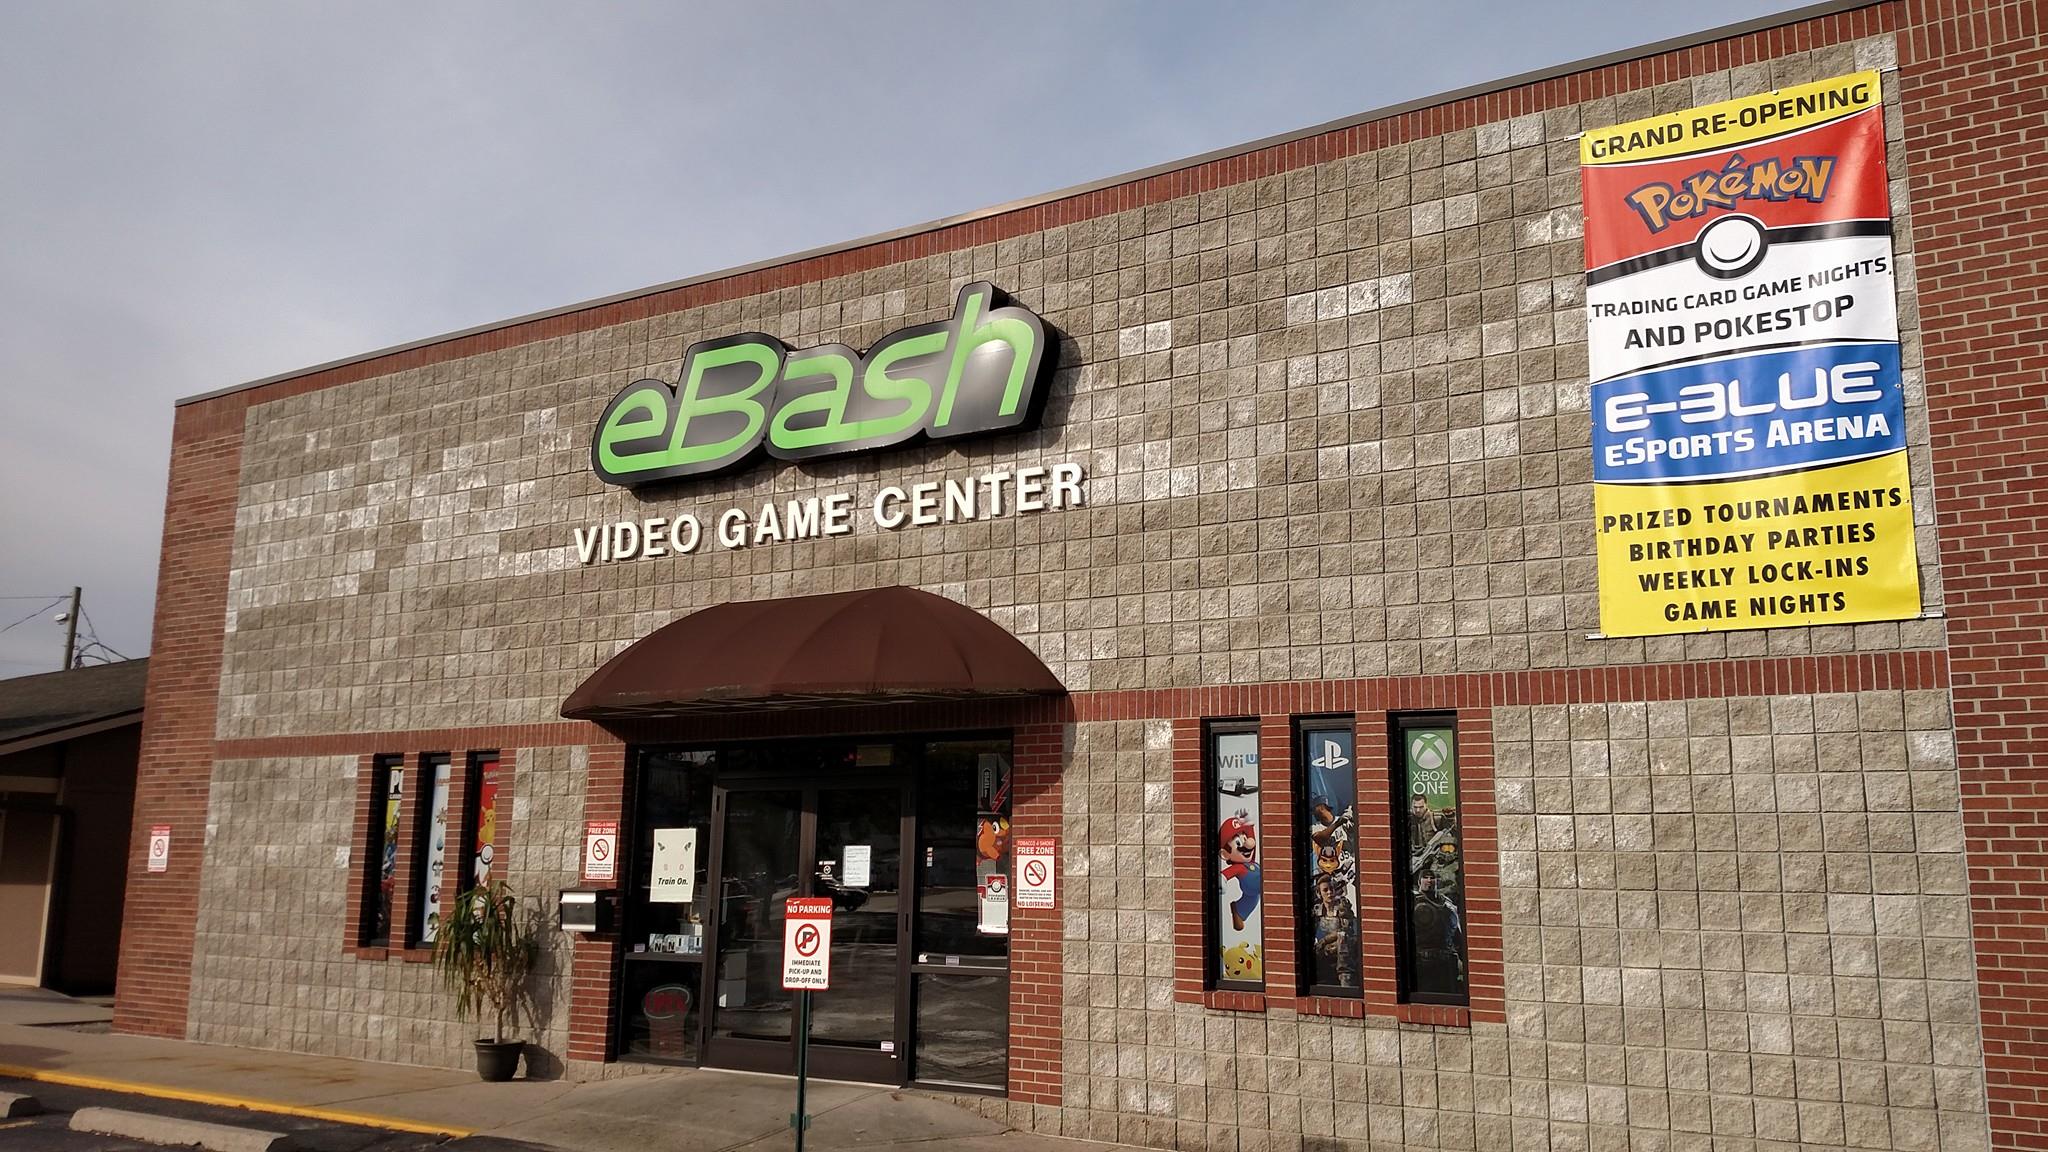 Our first venue eBash game center in Terre Haute, IN started in 2004.